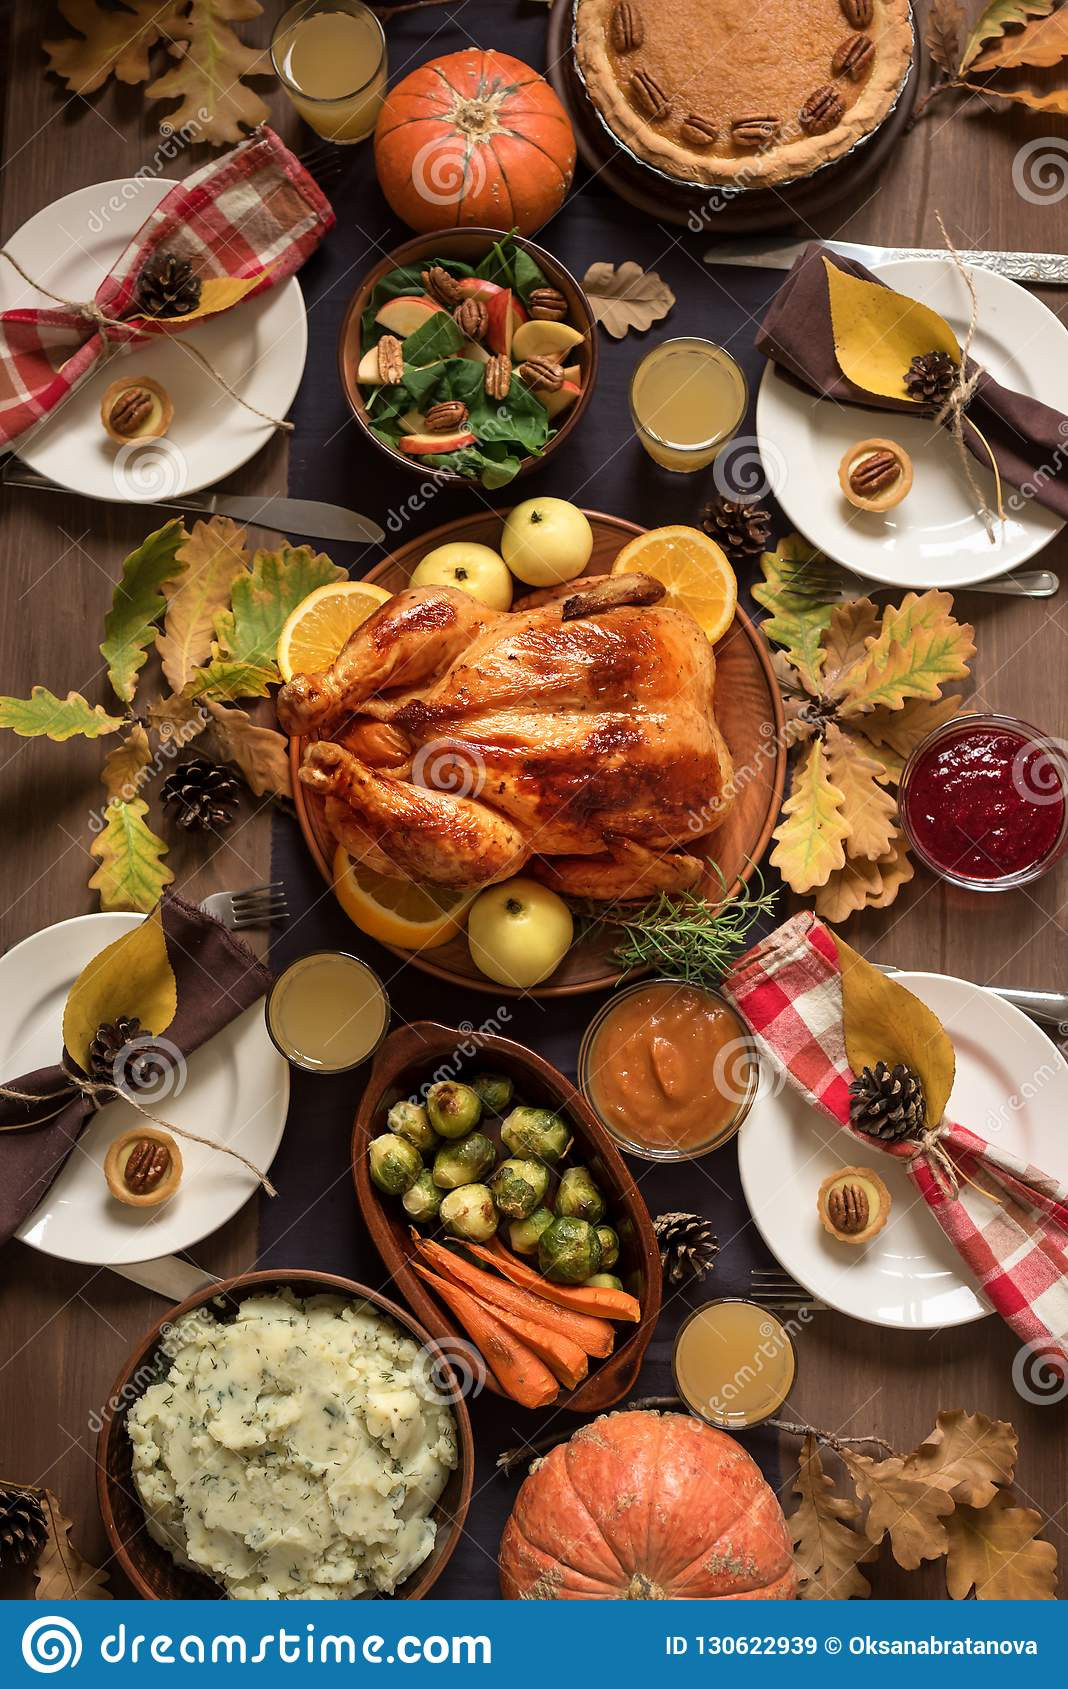 Turkey Dinner Sides
 Thanksgiving Turkey Dinner With All The Sides Stock Image